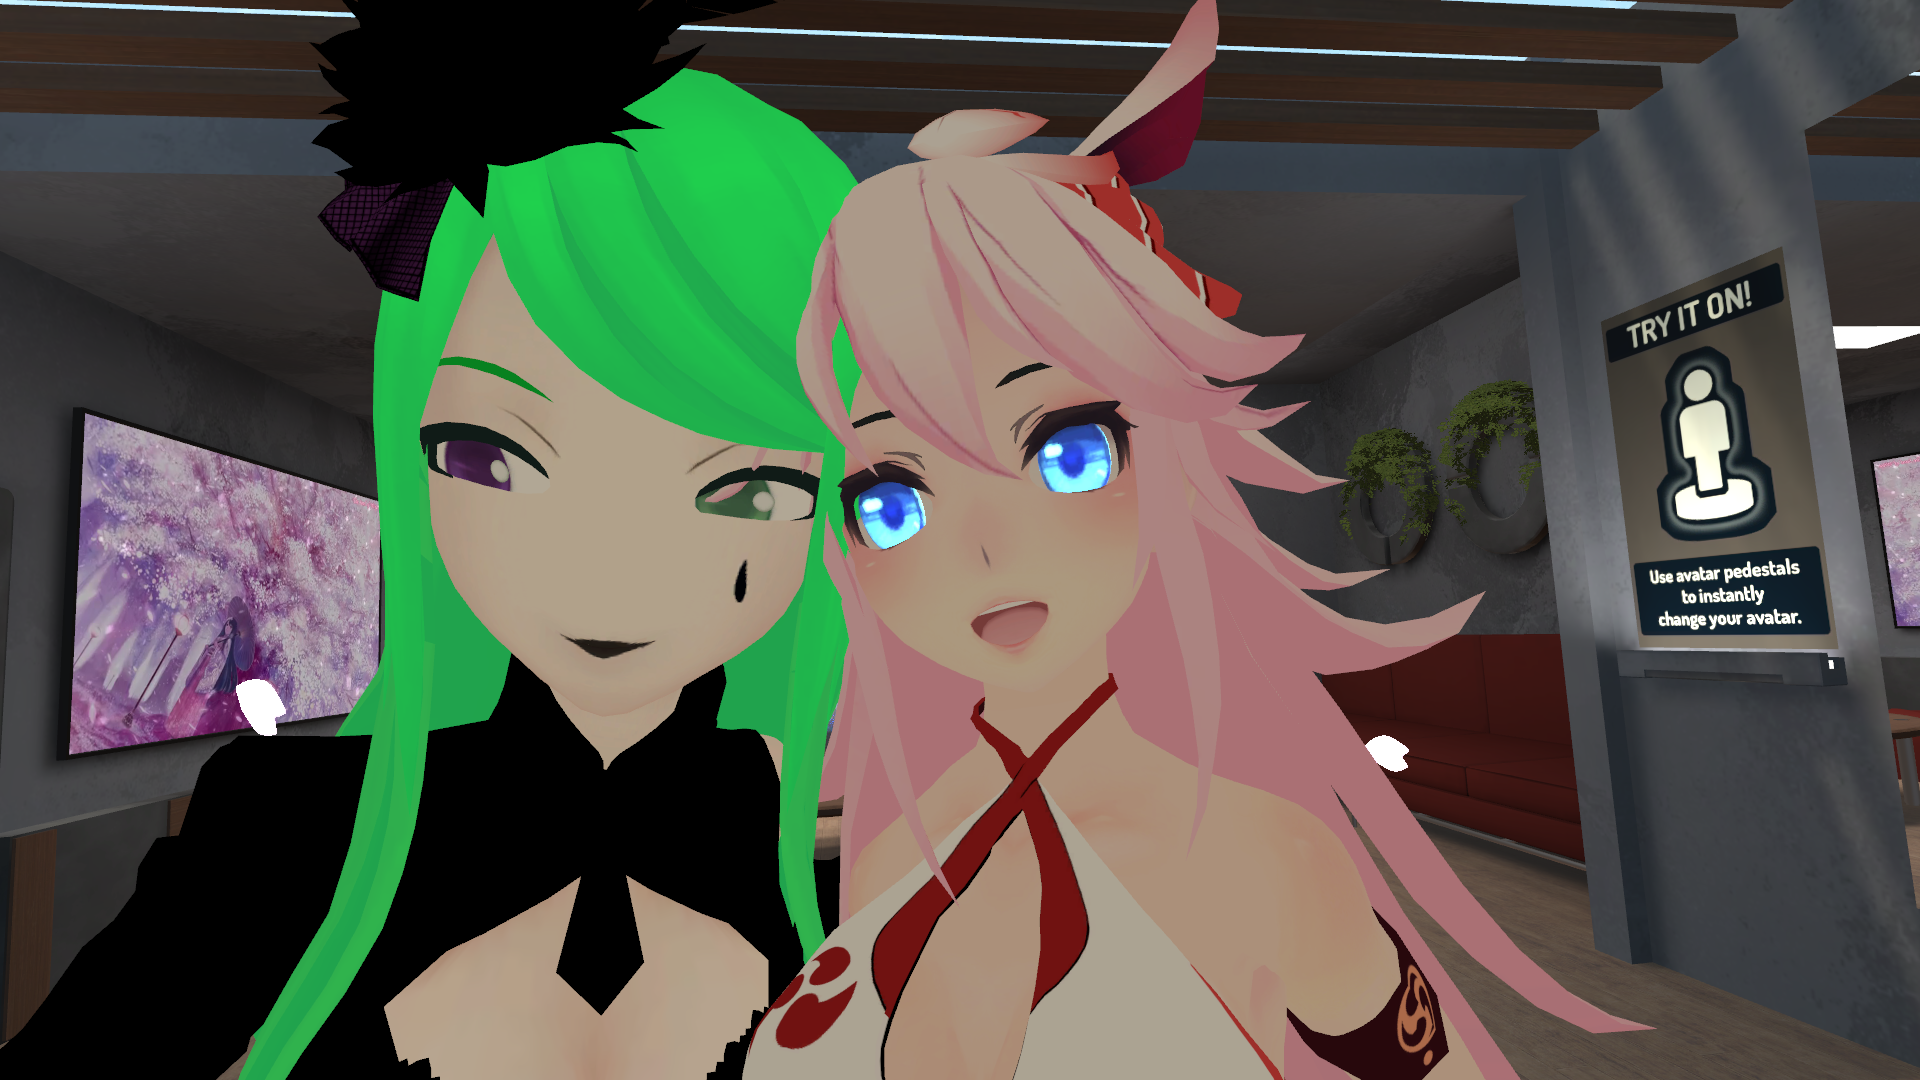 VRChat_1920x1080_2018-04-29_01-39-52.393.png